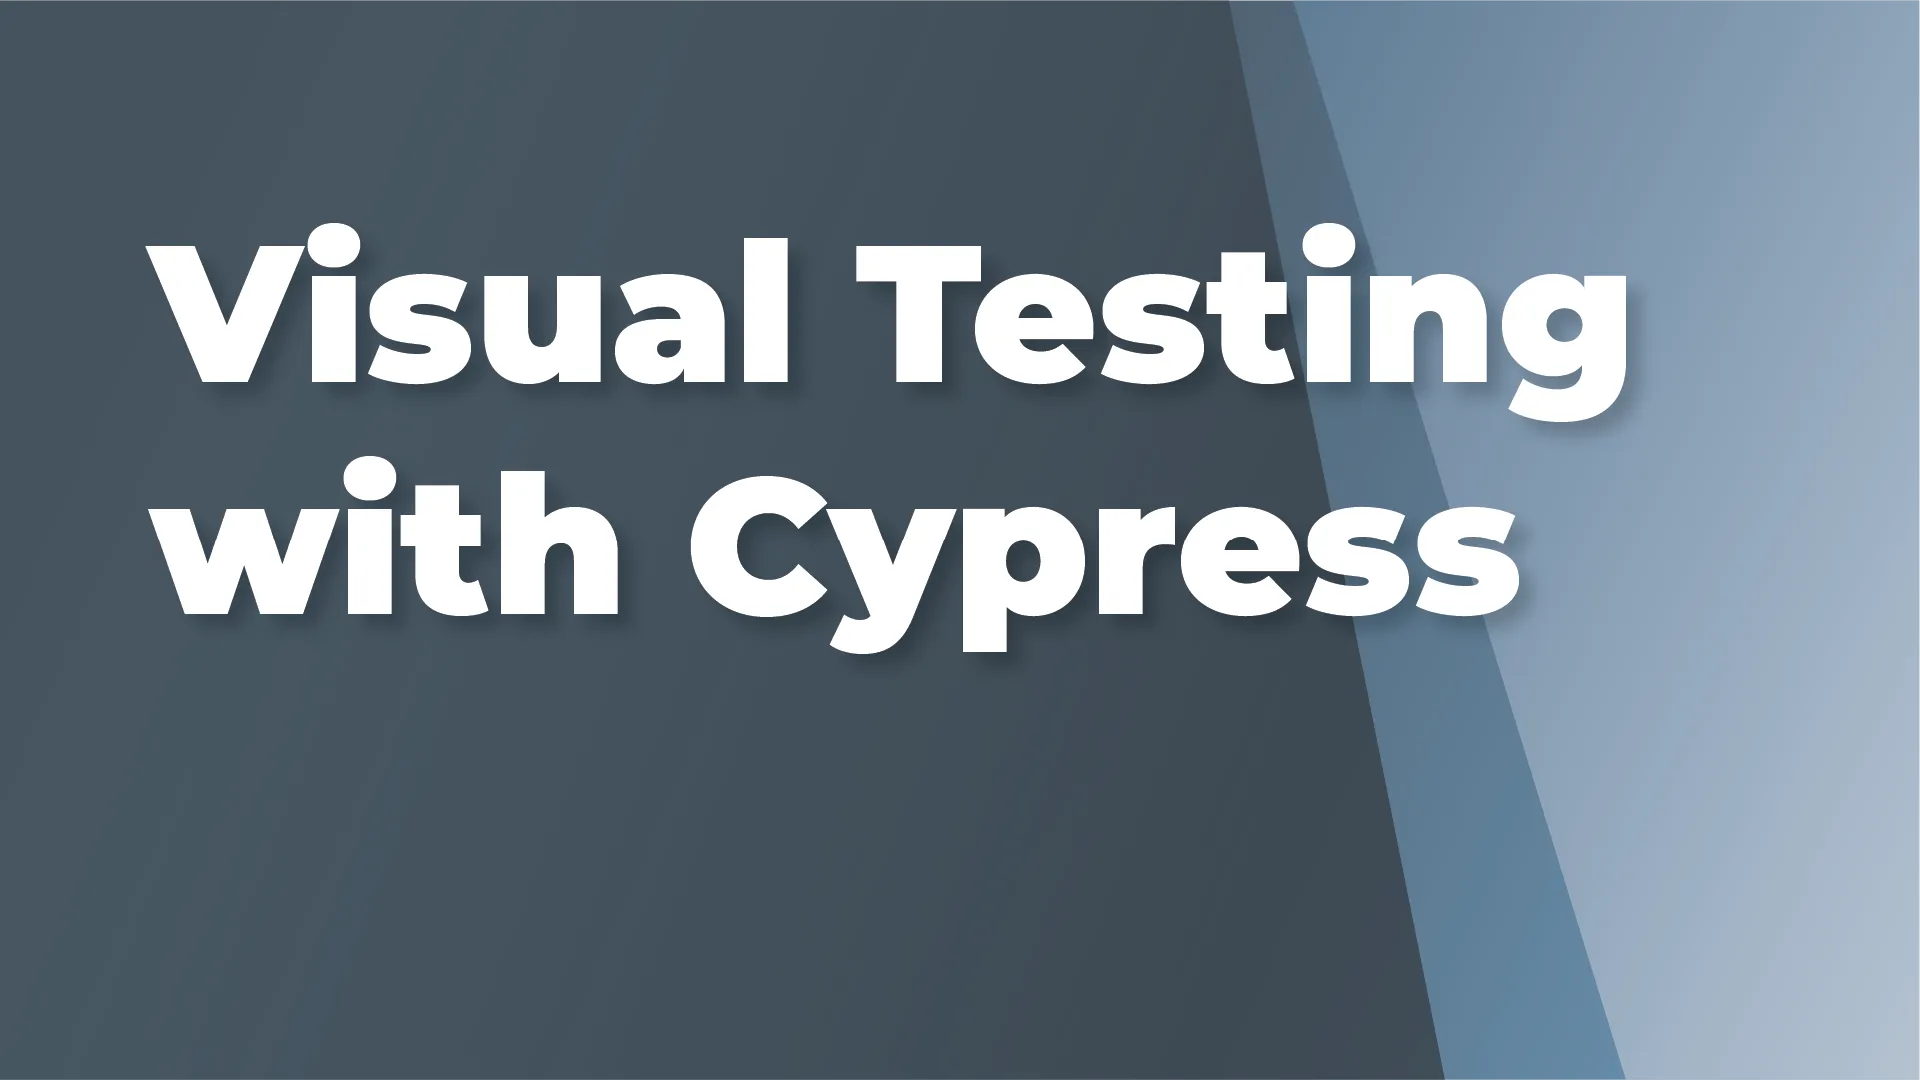 Visual Testing with Cypress